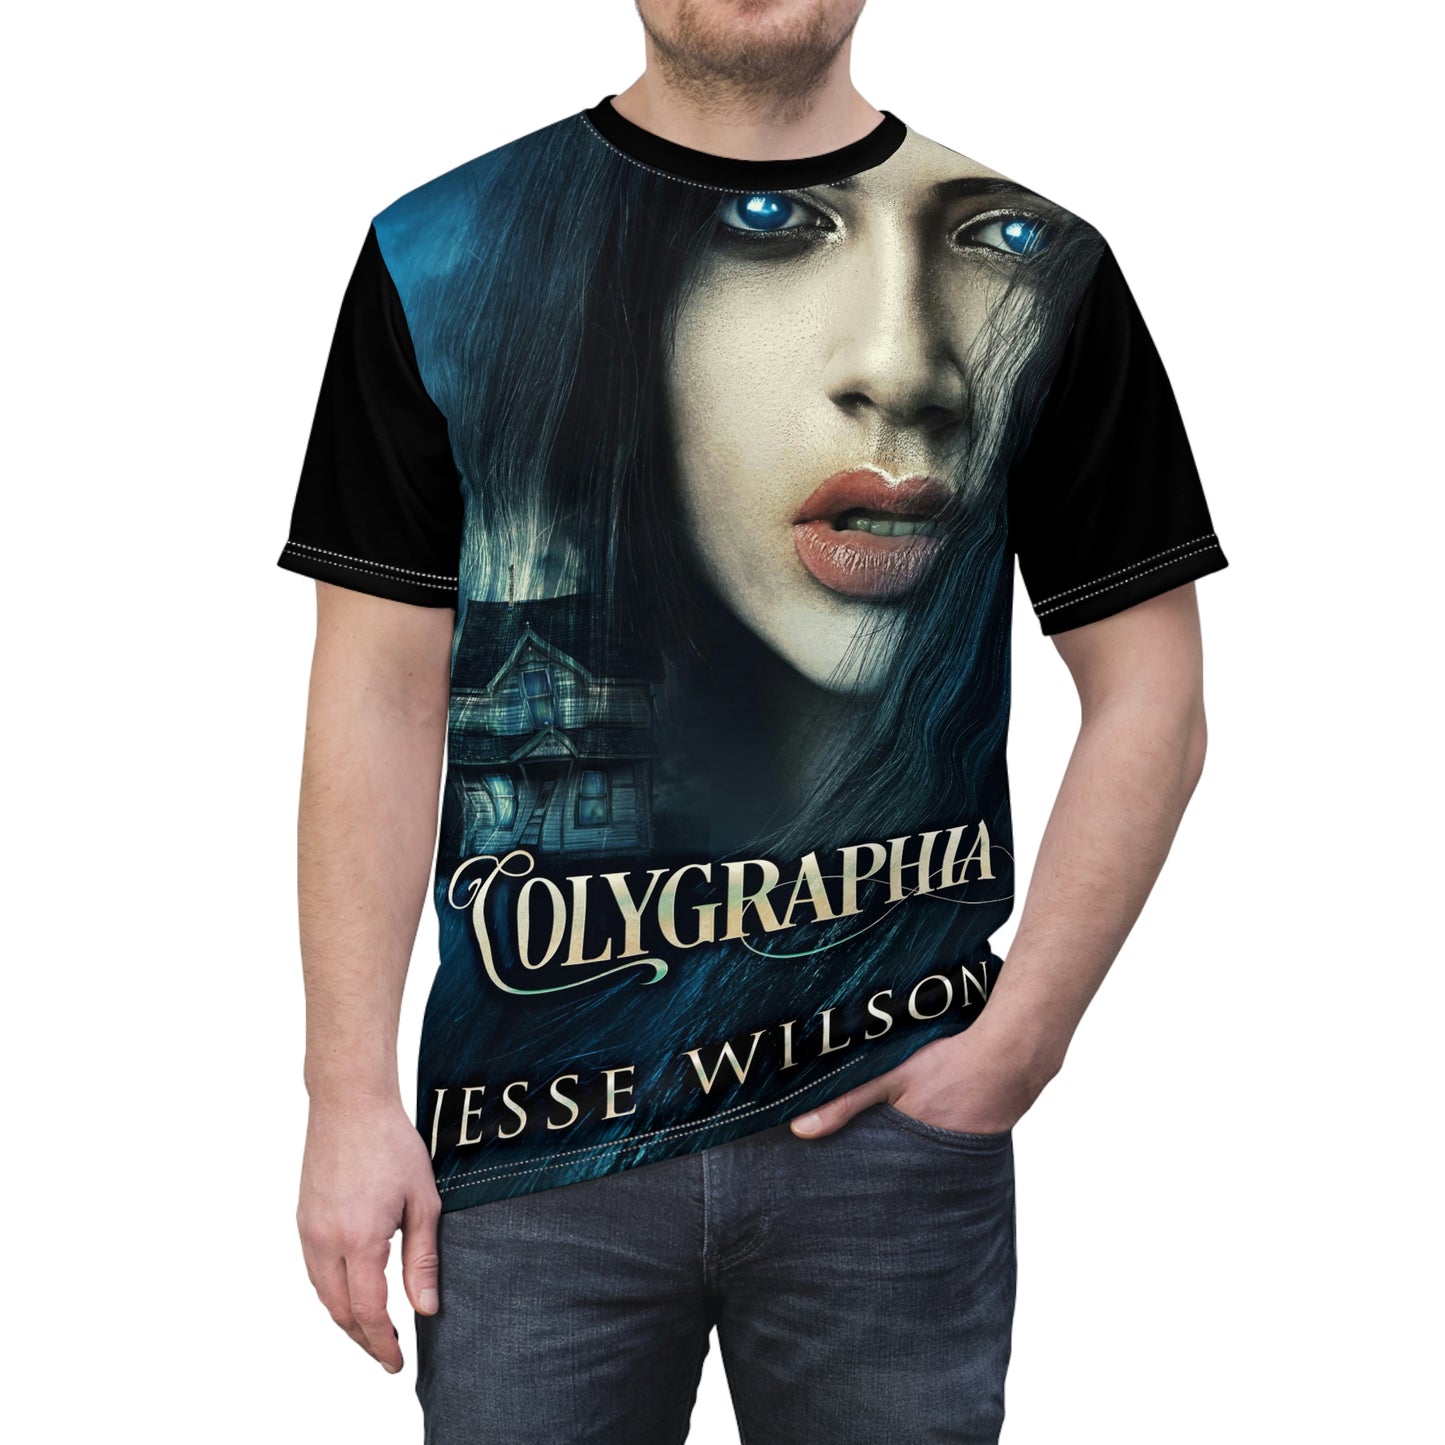 Colygraphia - Unisex All-Over Print Cut & Sew T-Shirt